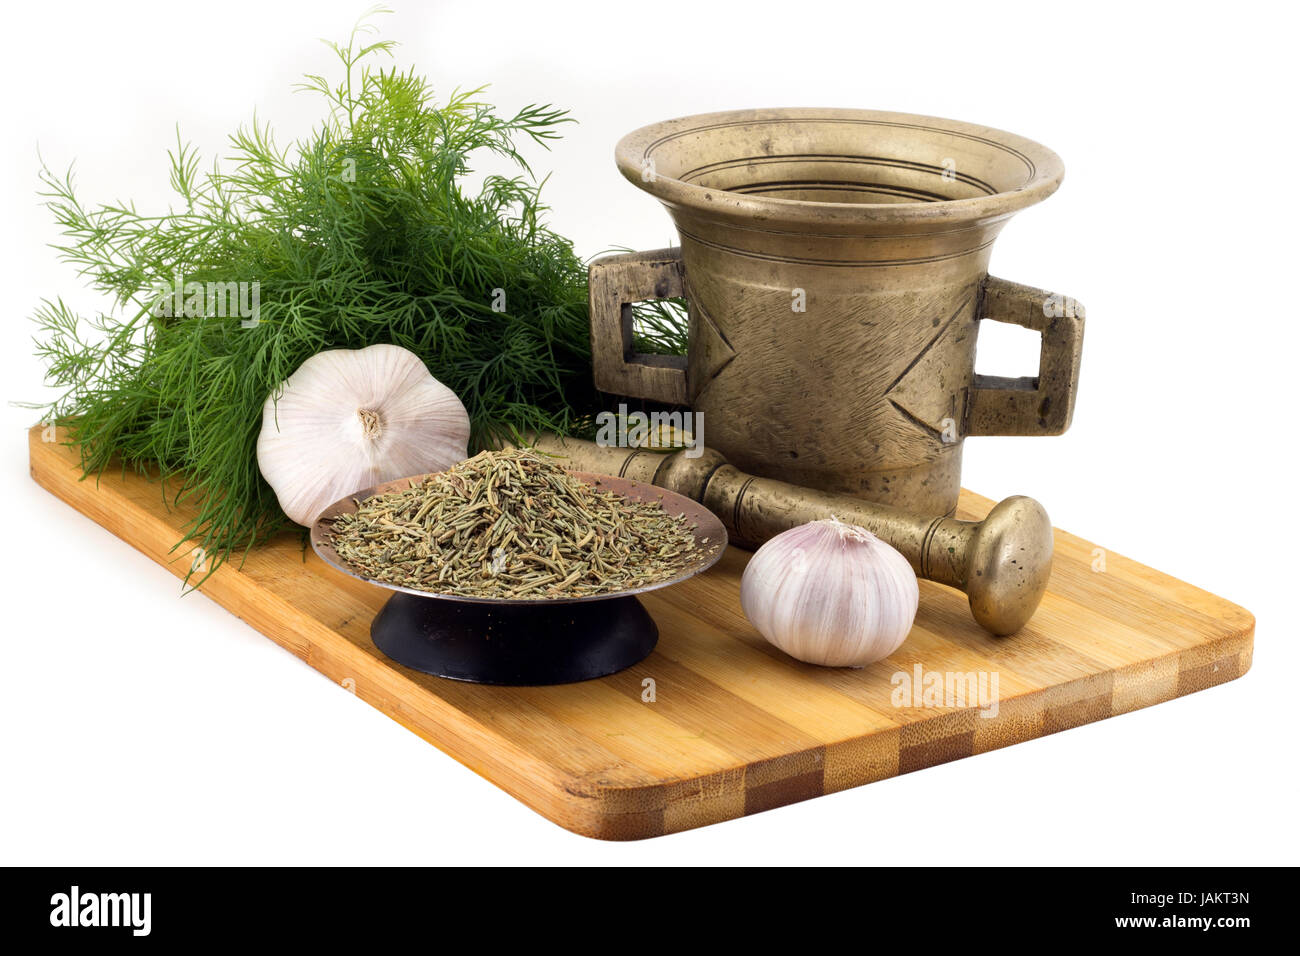 Still Life Spices,rosemary ,marigold staminas in a copper vase on a wooden board on a background of a stern stupa for grinding spices, bunches of dill Stock Photo